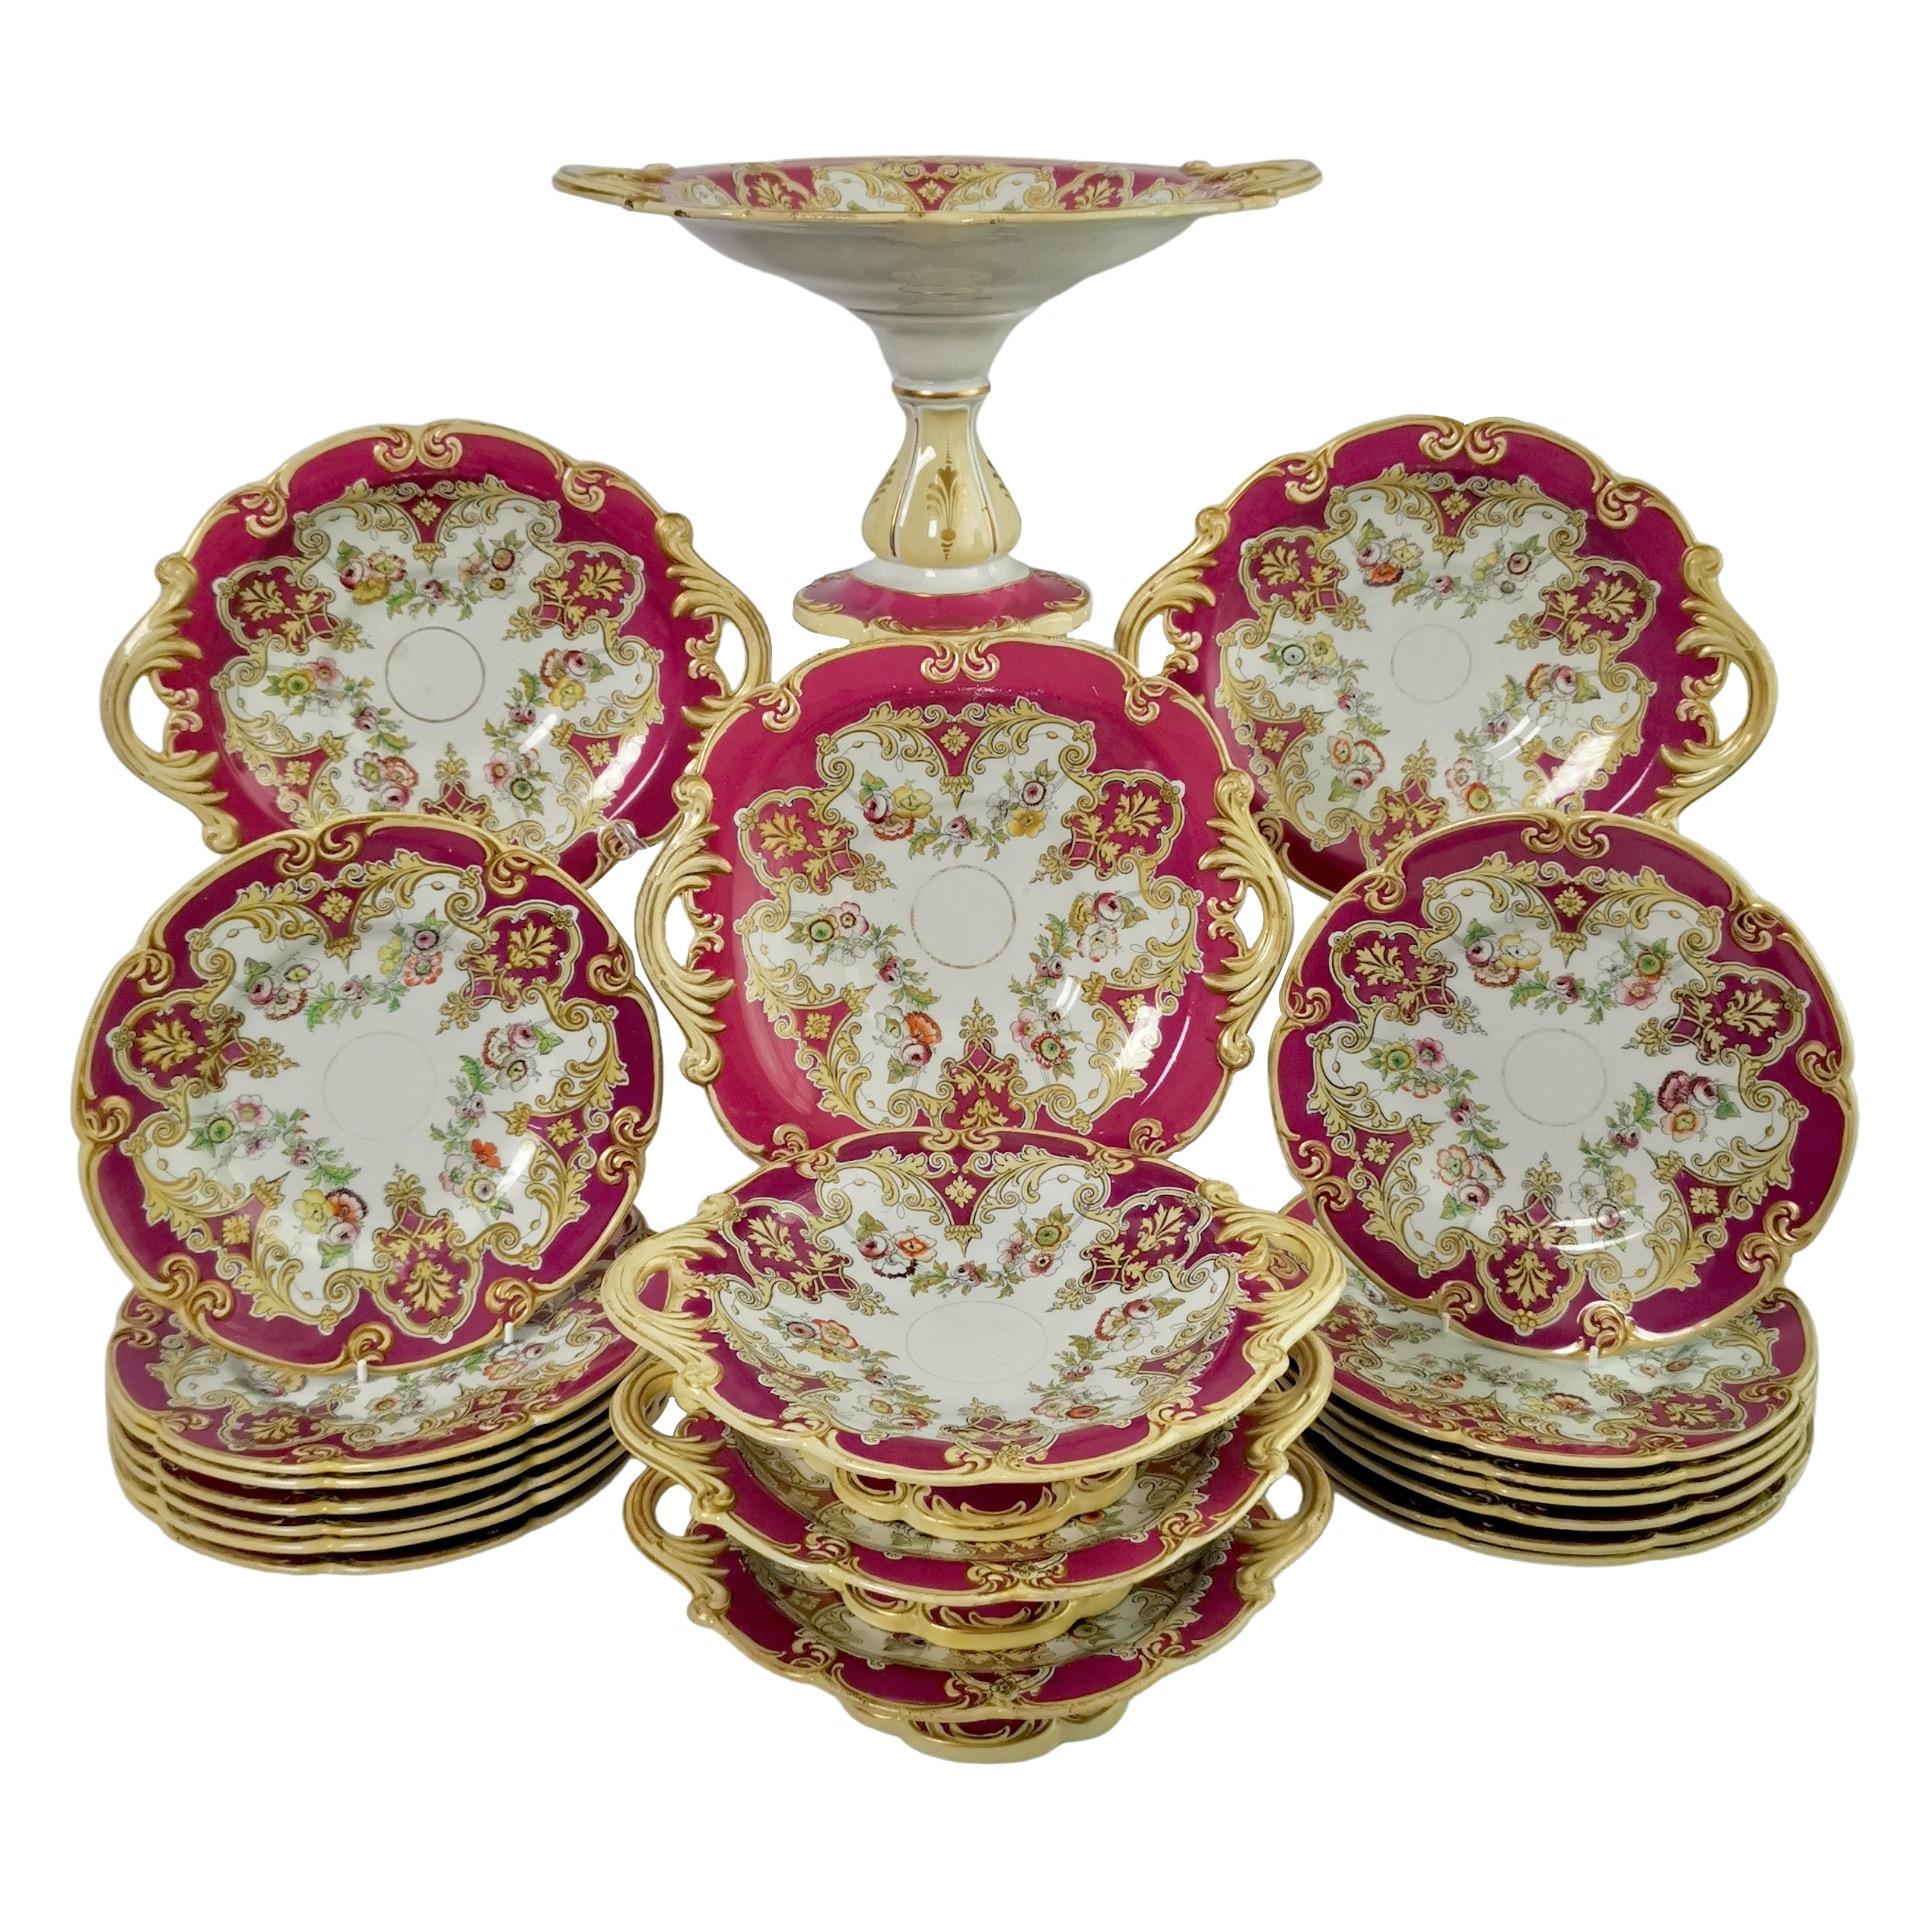 This is a fabulous large dessert plate made by E.J. Ridgway around 1870. The service has a dark fuchsia pink ground and printed and hand coloured flower festoons. The service consists of a high tazza, three round low comports, two oval low comports,